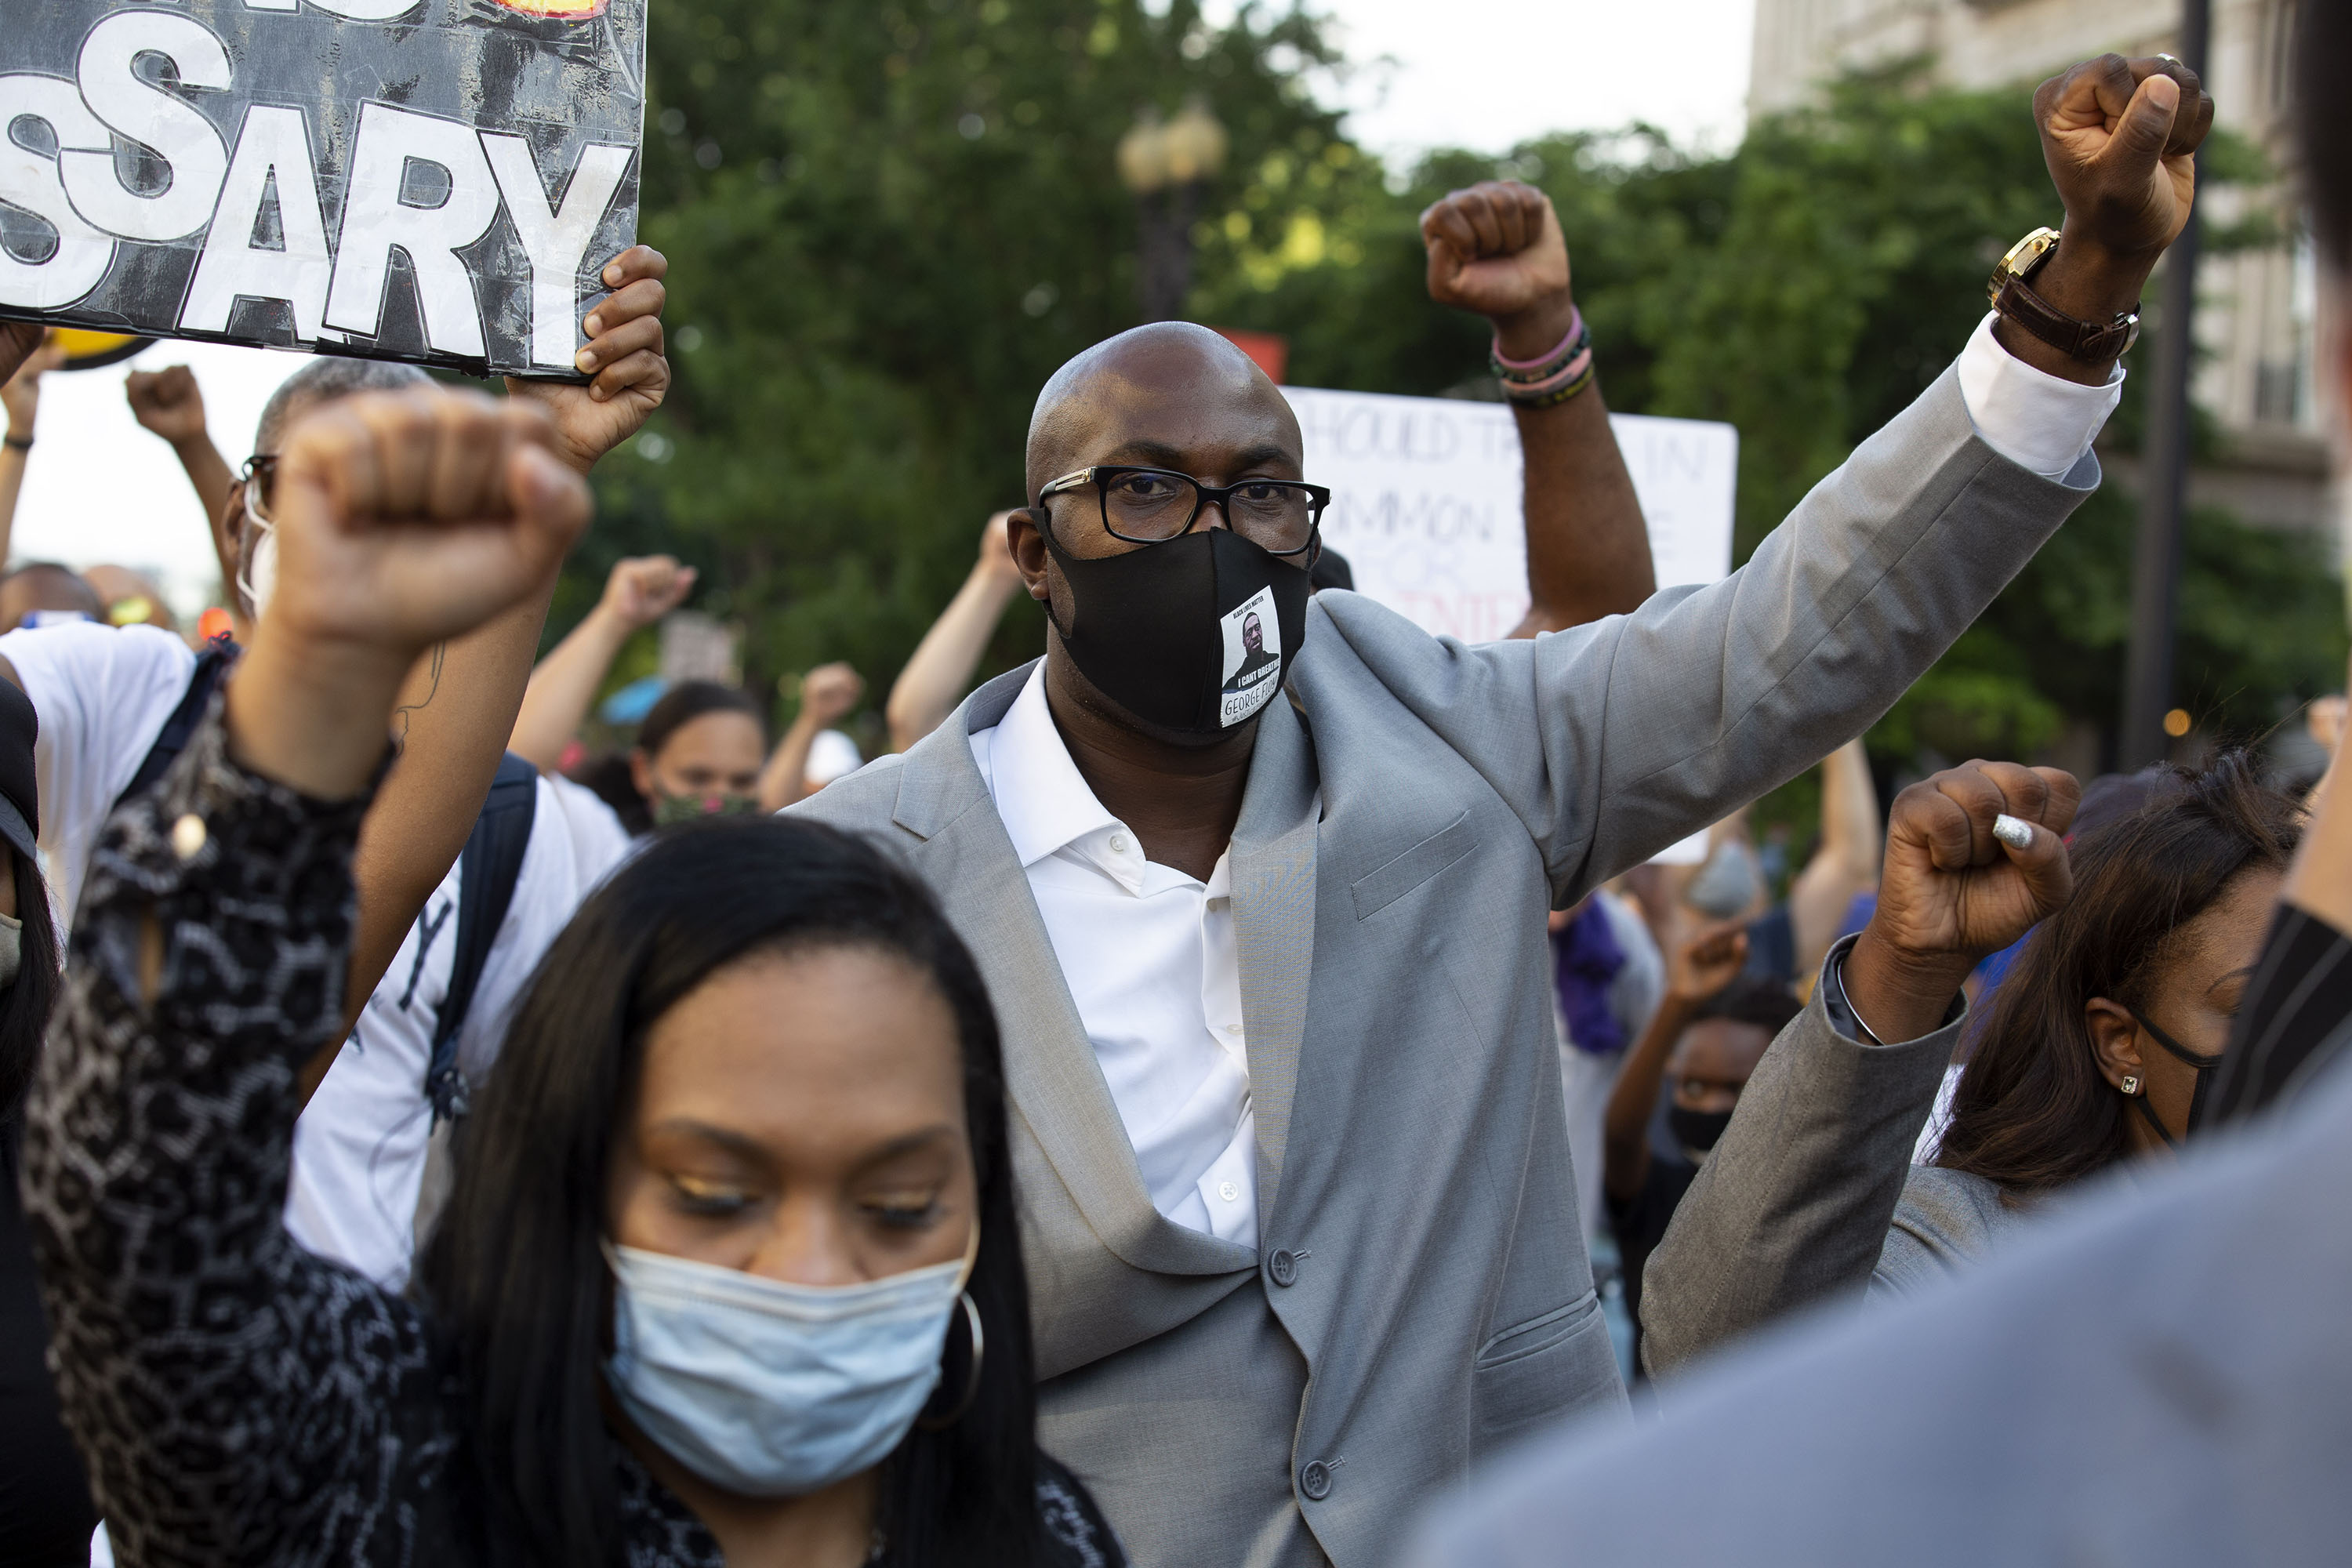 Philonise Floyd, George Floyd's brother, holds up his fist as he marches with the Black Lives Matter protest near the White House, in Washington DC, on June 10. 